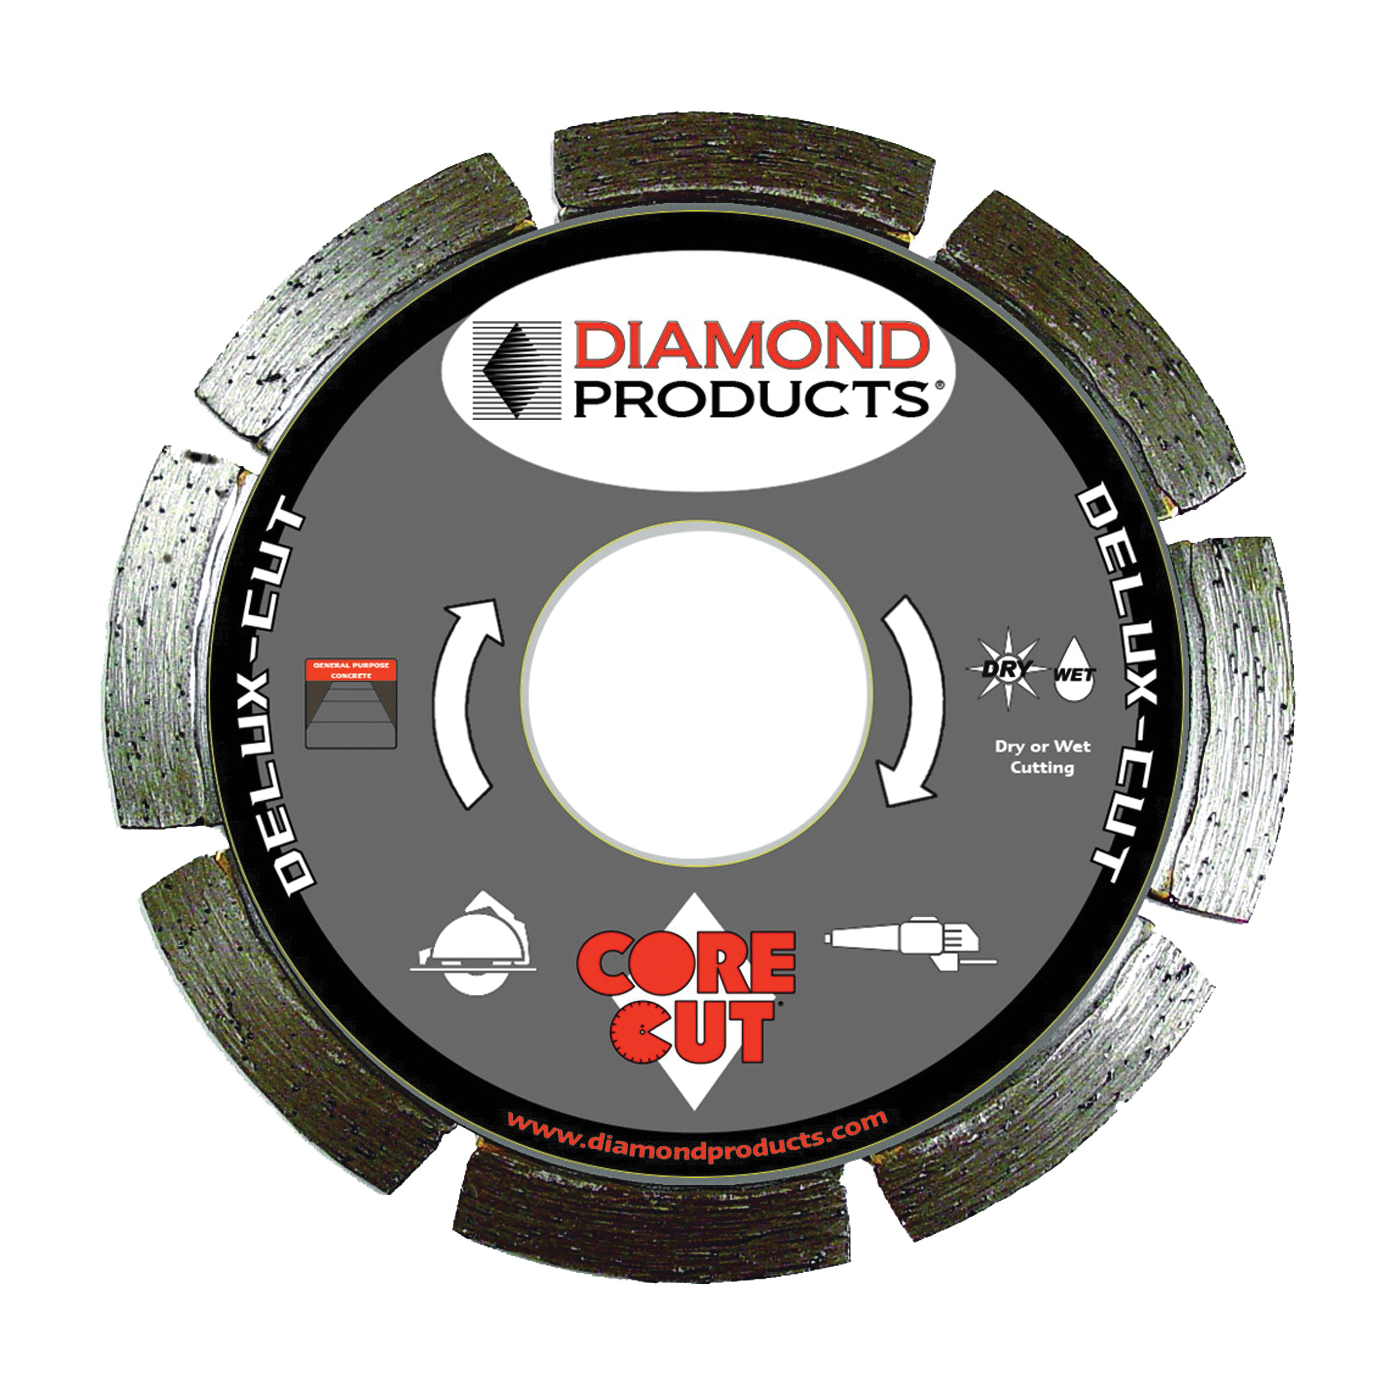 Diamond Products 21002 Circular Saw Blade, 4-1/2 in Dia, 7/8 in Arbor, Applicable Materials: Concrete - 1